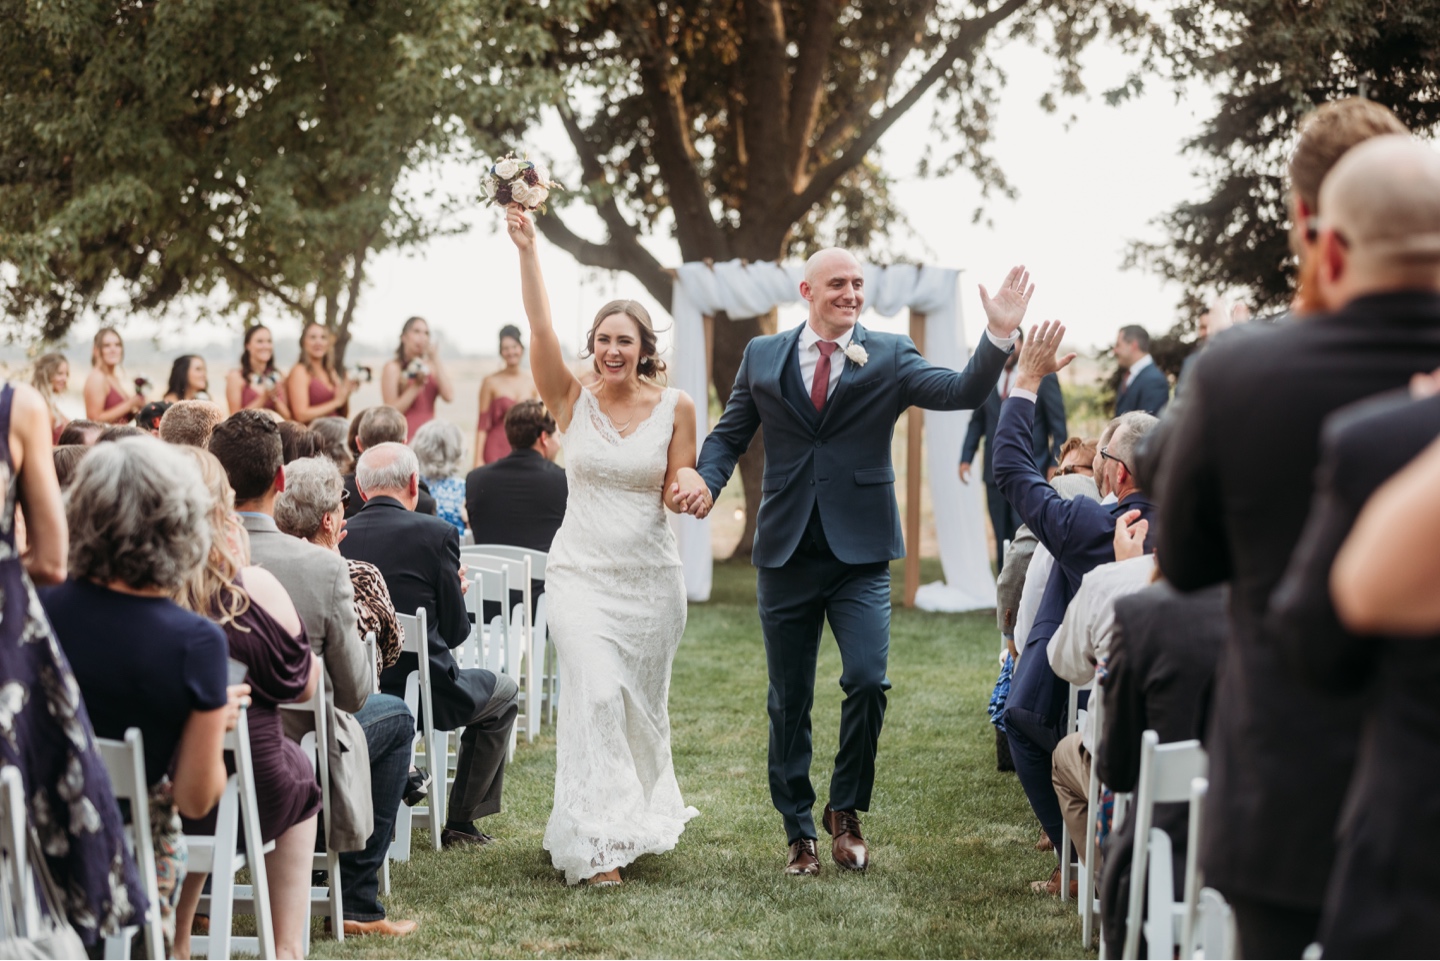 Newly married husband and wife walk down the aisle high fiving and cheering with their wedding guests. Wedding photography in Sacramento by Liz Koston.